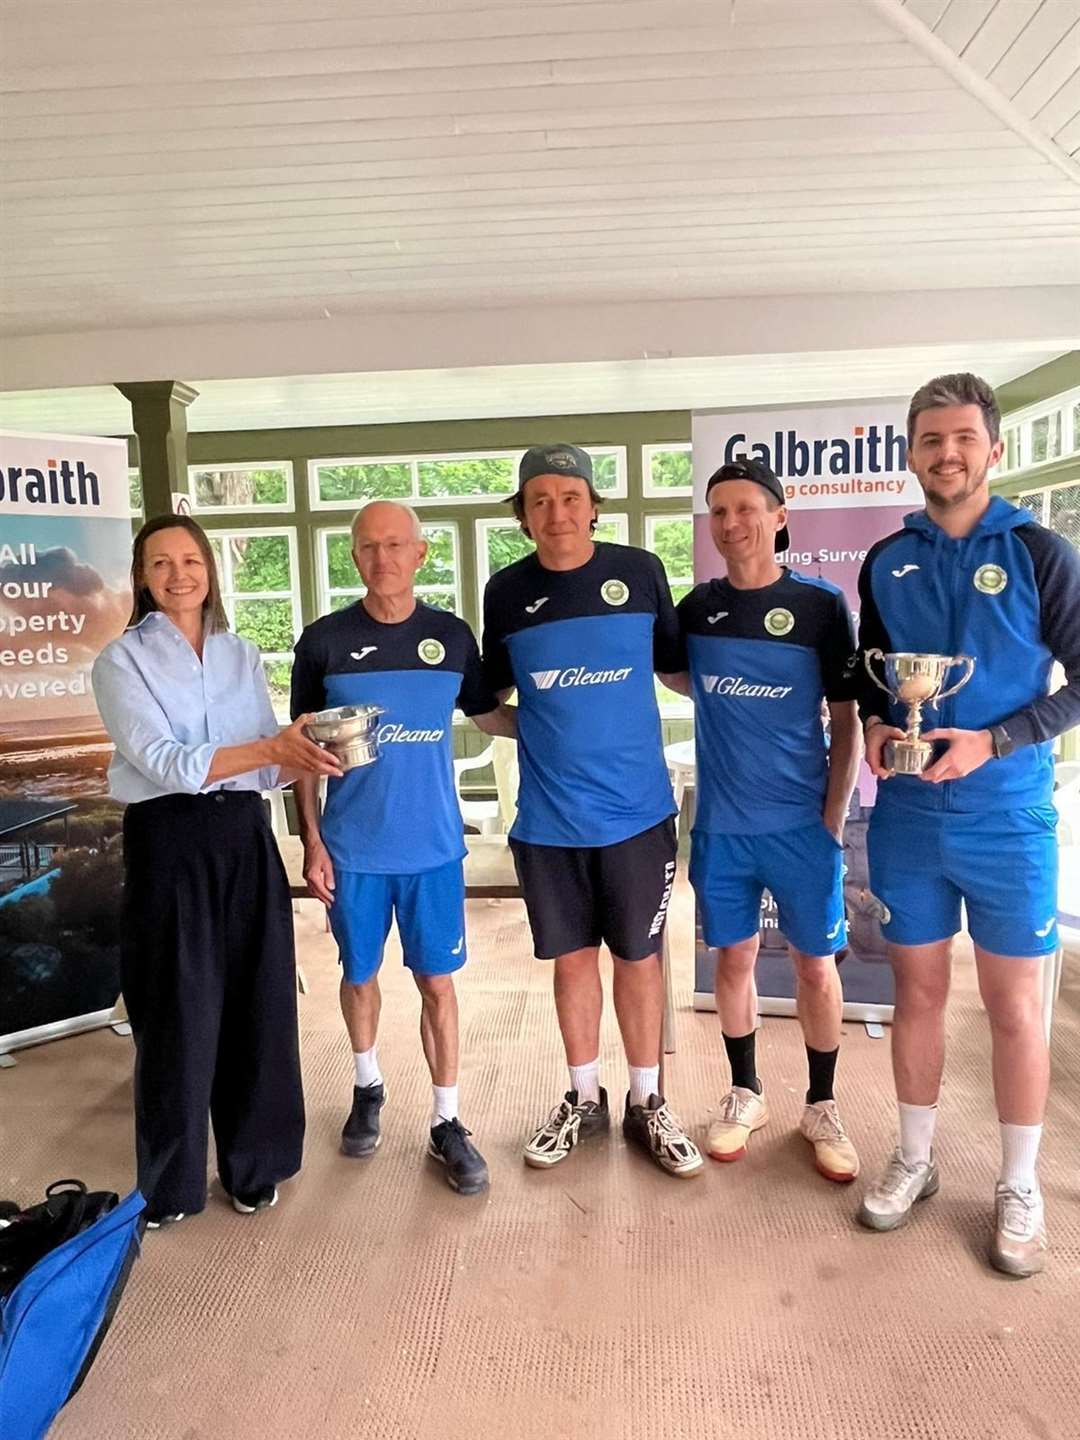 The Lossiemouth team that won Men's Division 2. From left: Phiddy Robertson (of Galbraith), David Williams, Ed Borrowman, Tim Dickinson and Keiran Carty.